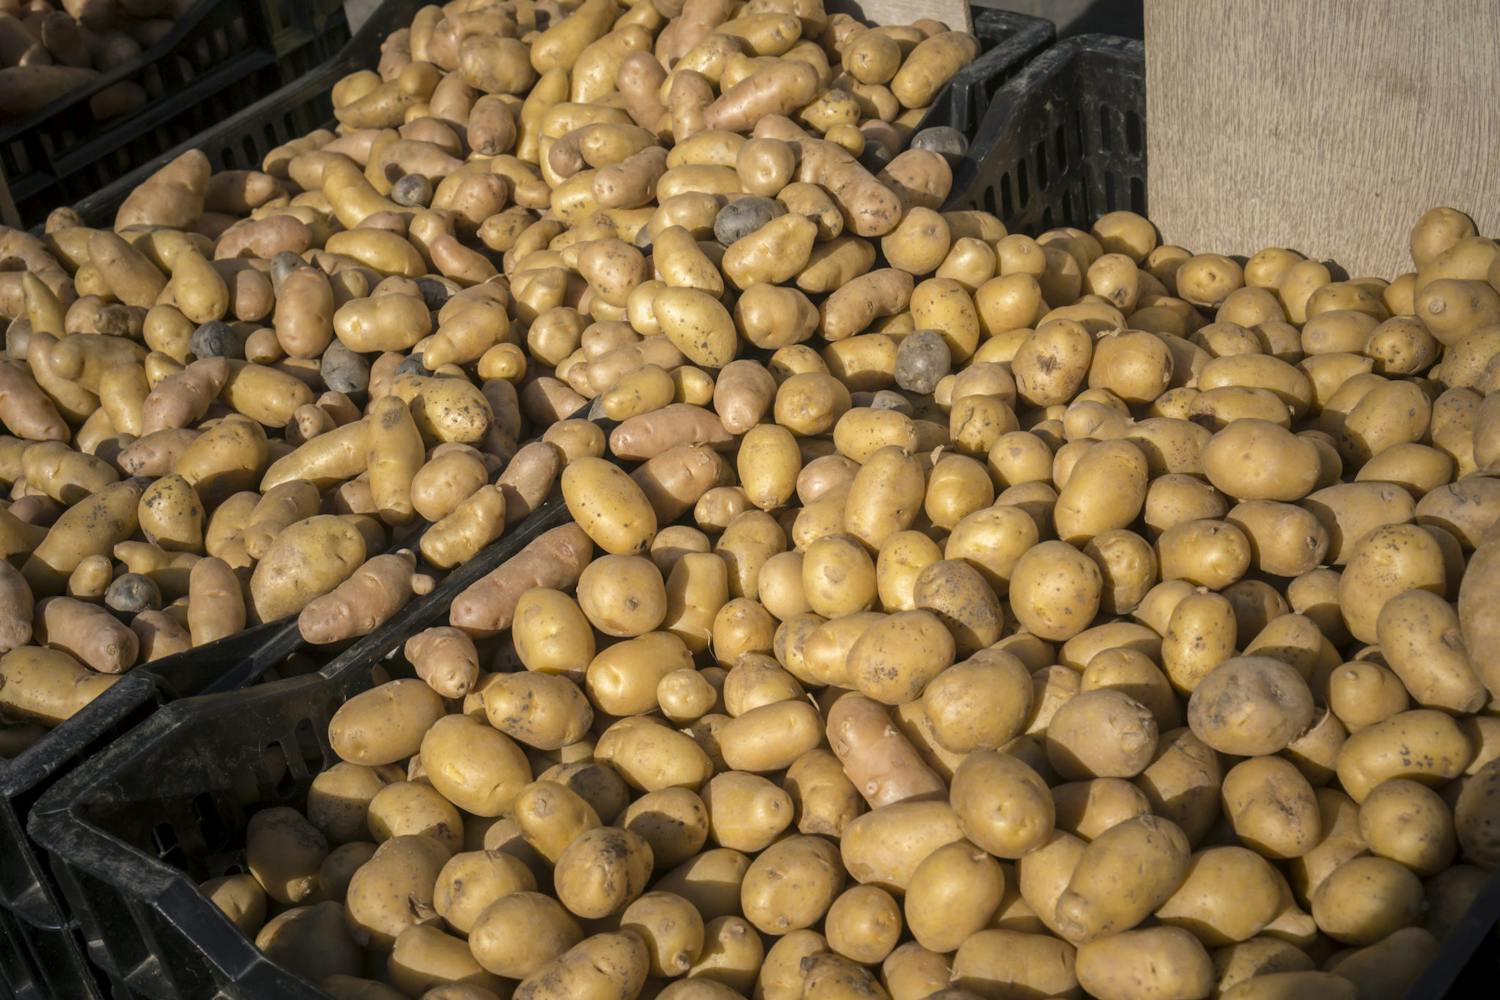 Farming: It's National Spud Day This Friday